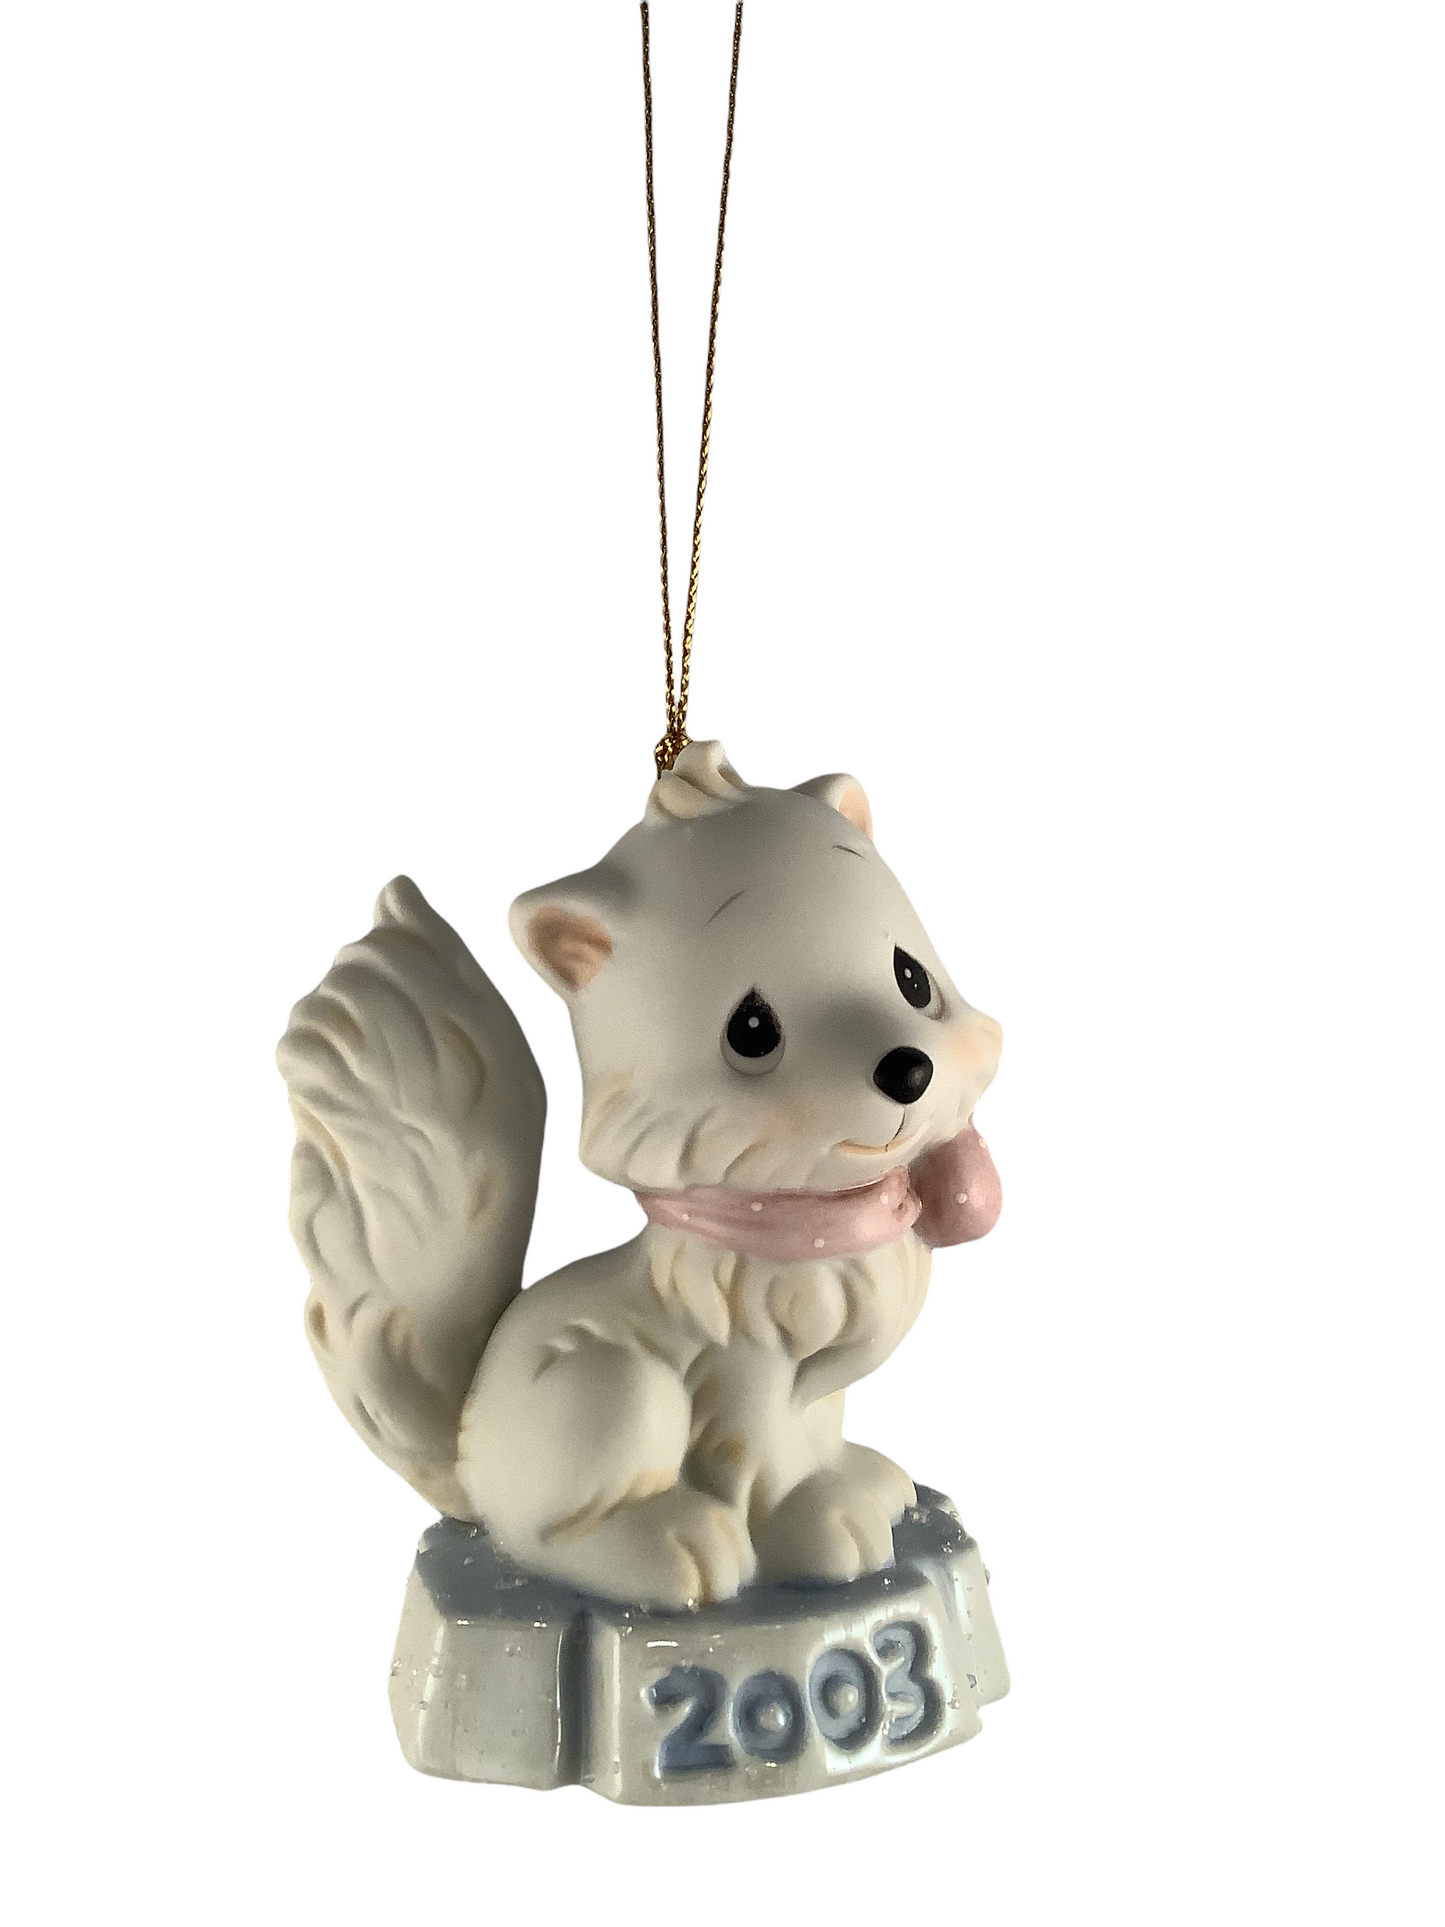 Bright Eyed & Bushy Tailed - 2003 Dated Precious Moment Ornament